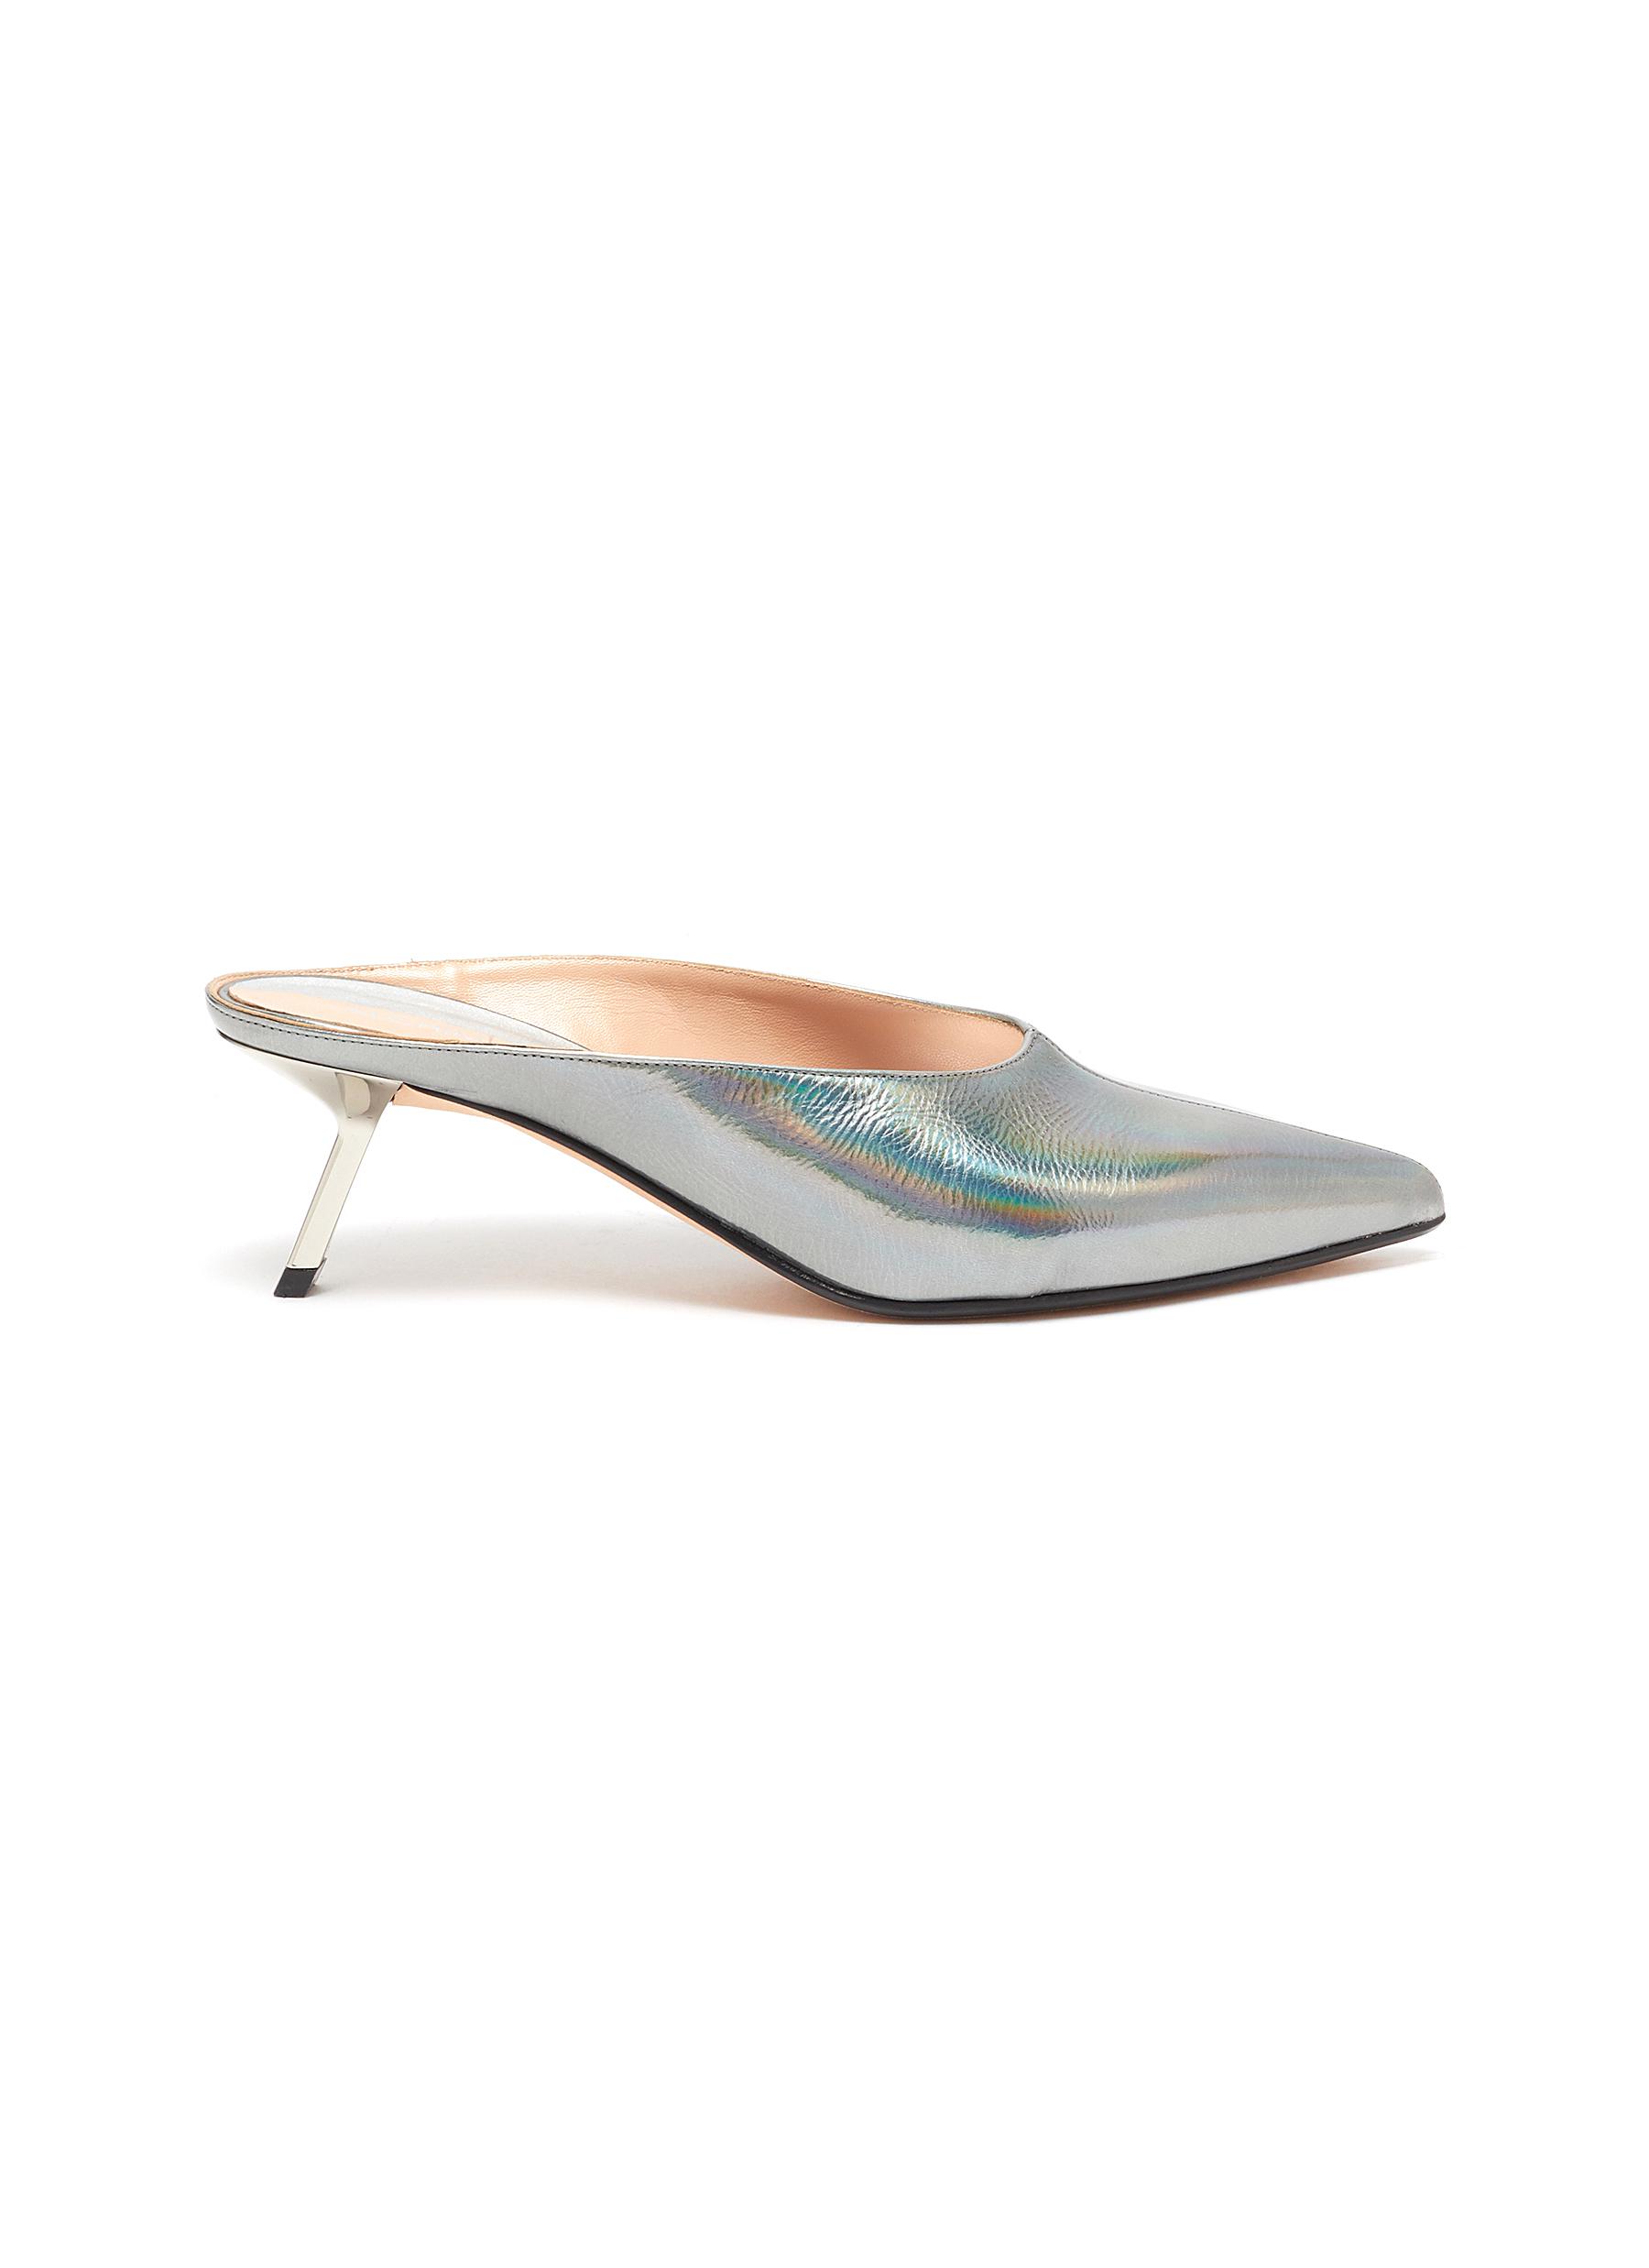 Aster holographic leather mules by Alchimia Di Ballin